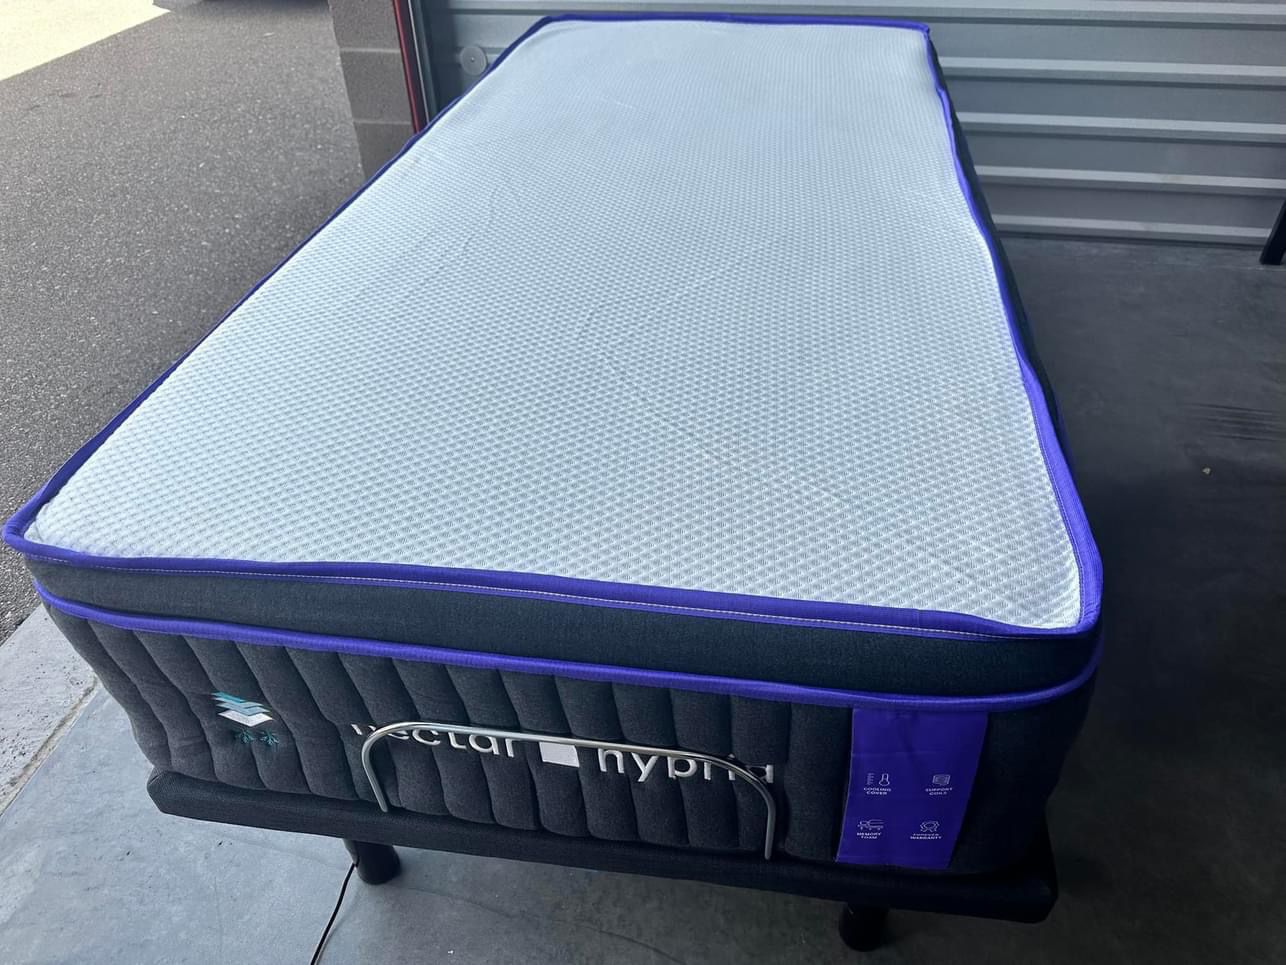 Nectar Premier Hybrid Mattress, Twin, Like New, Perfect Condition 295 